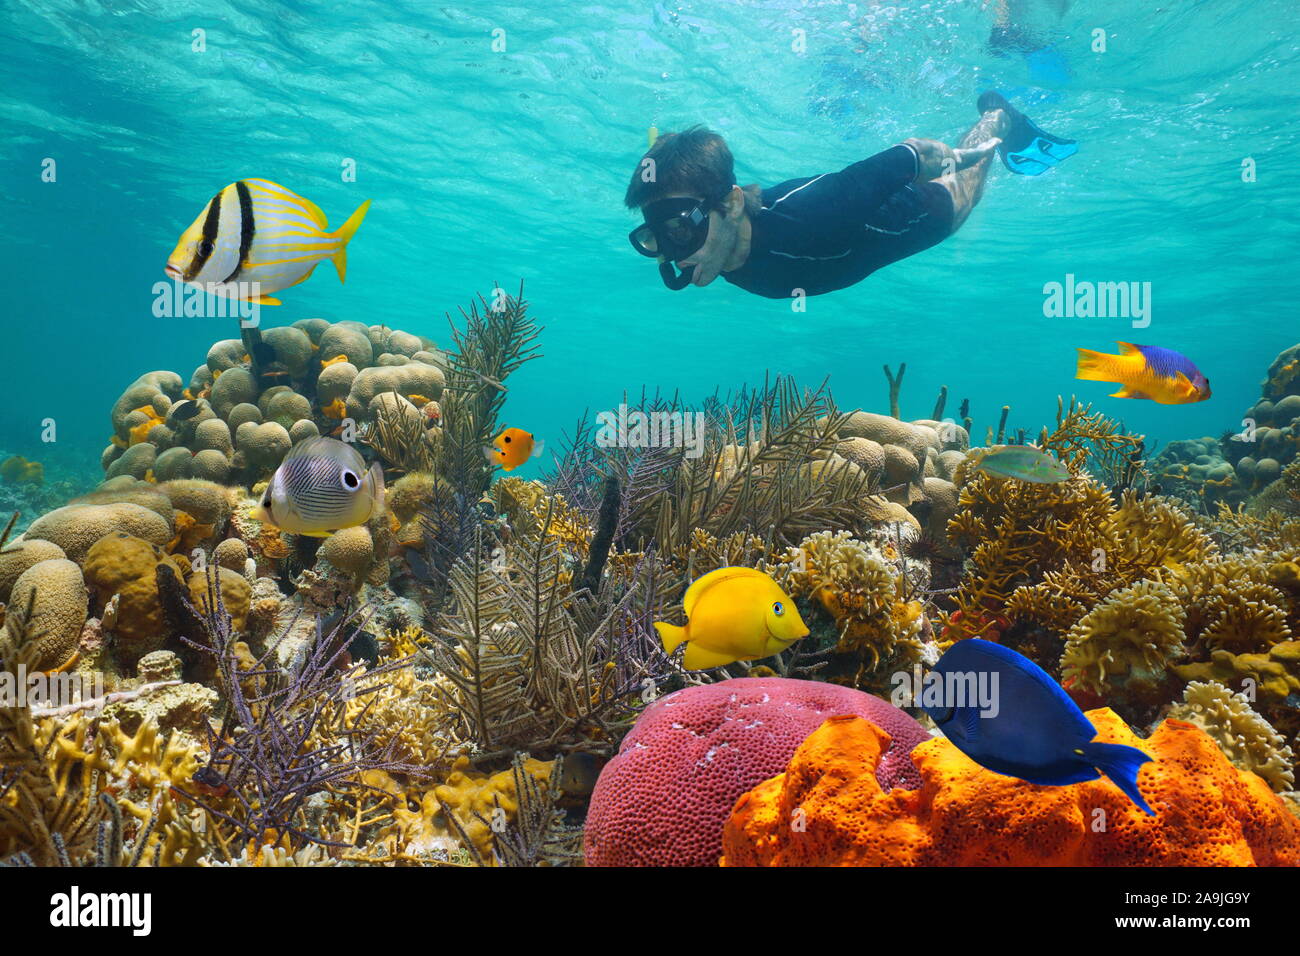 Caribbean sea colorful coral reef with tropical fish and a man snorkeling underwater Stock Photo